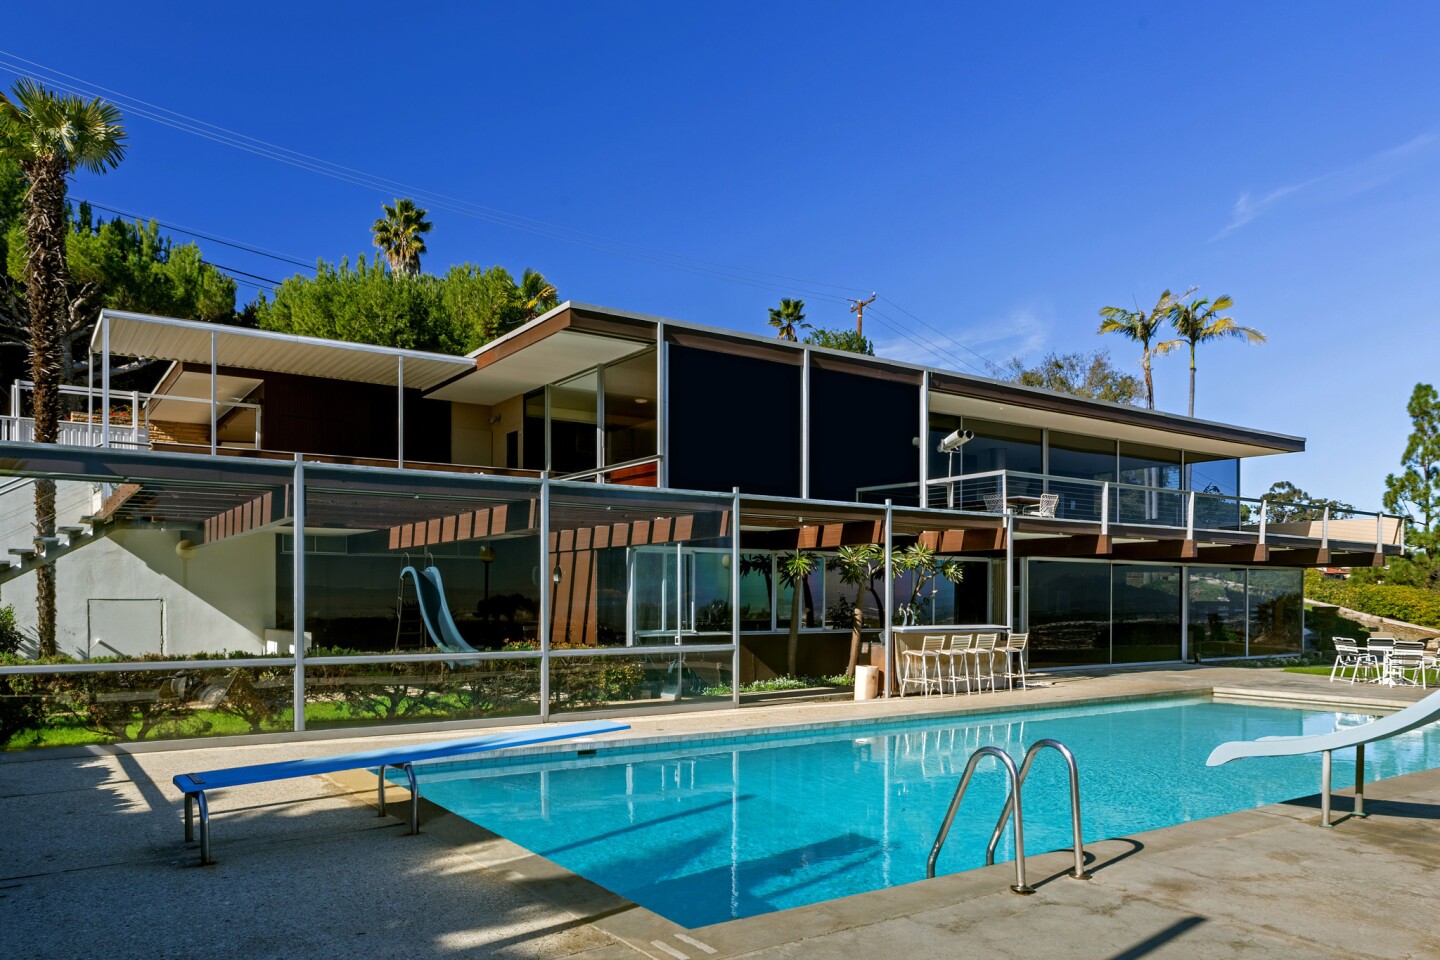 Among the largest Neutra-designed homes in the U.S., this two-story with nautical touches surveys the Port of Los Angeles.